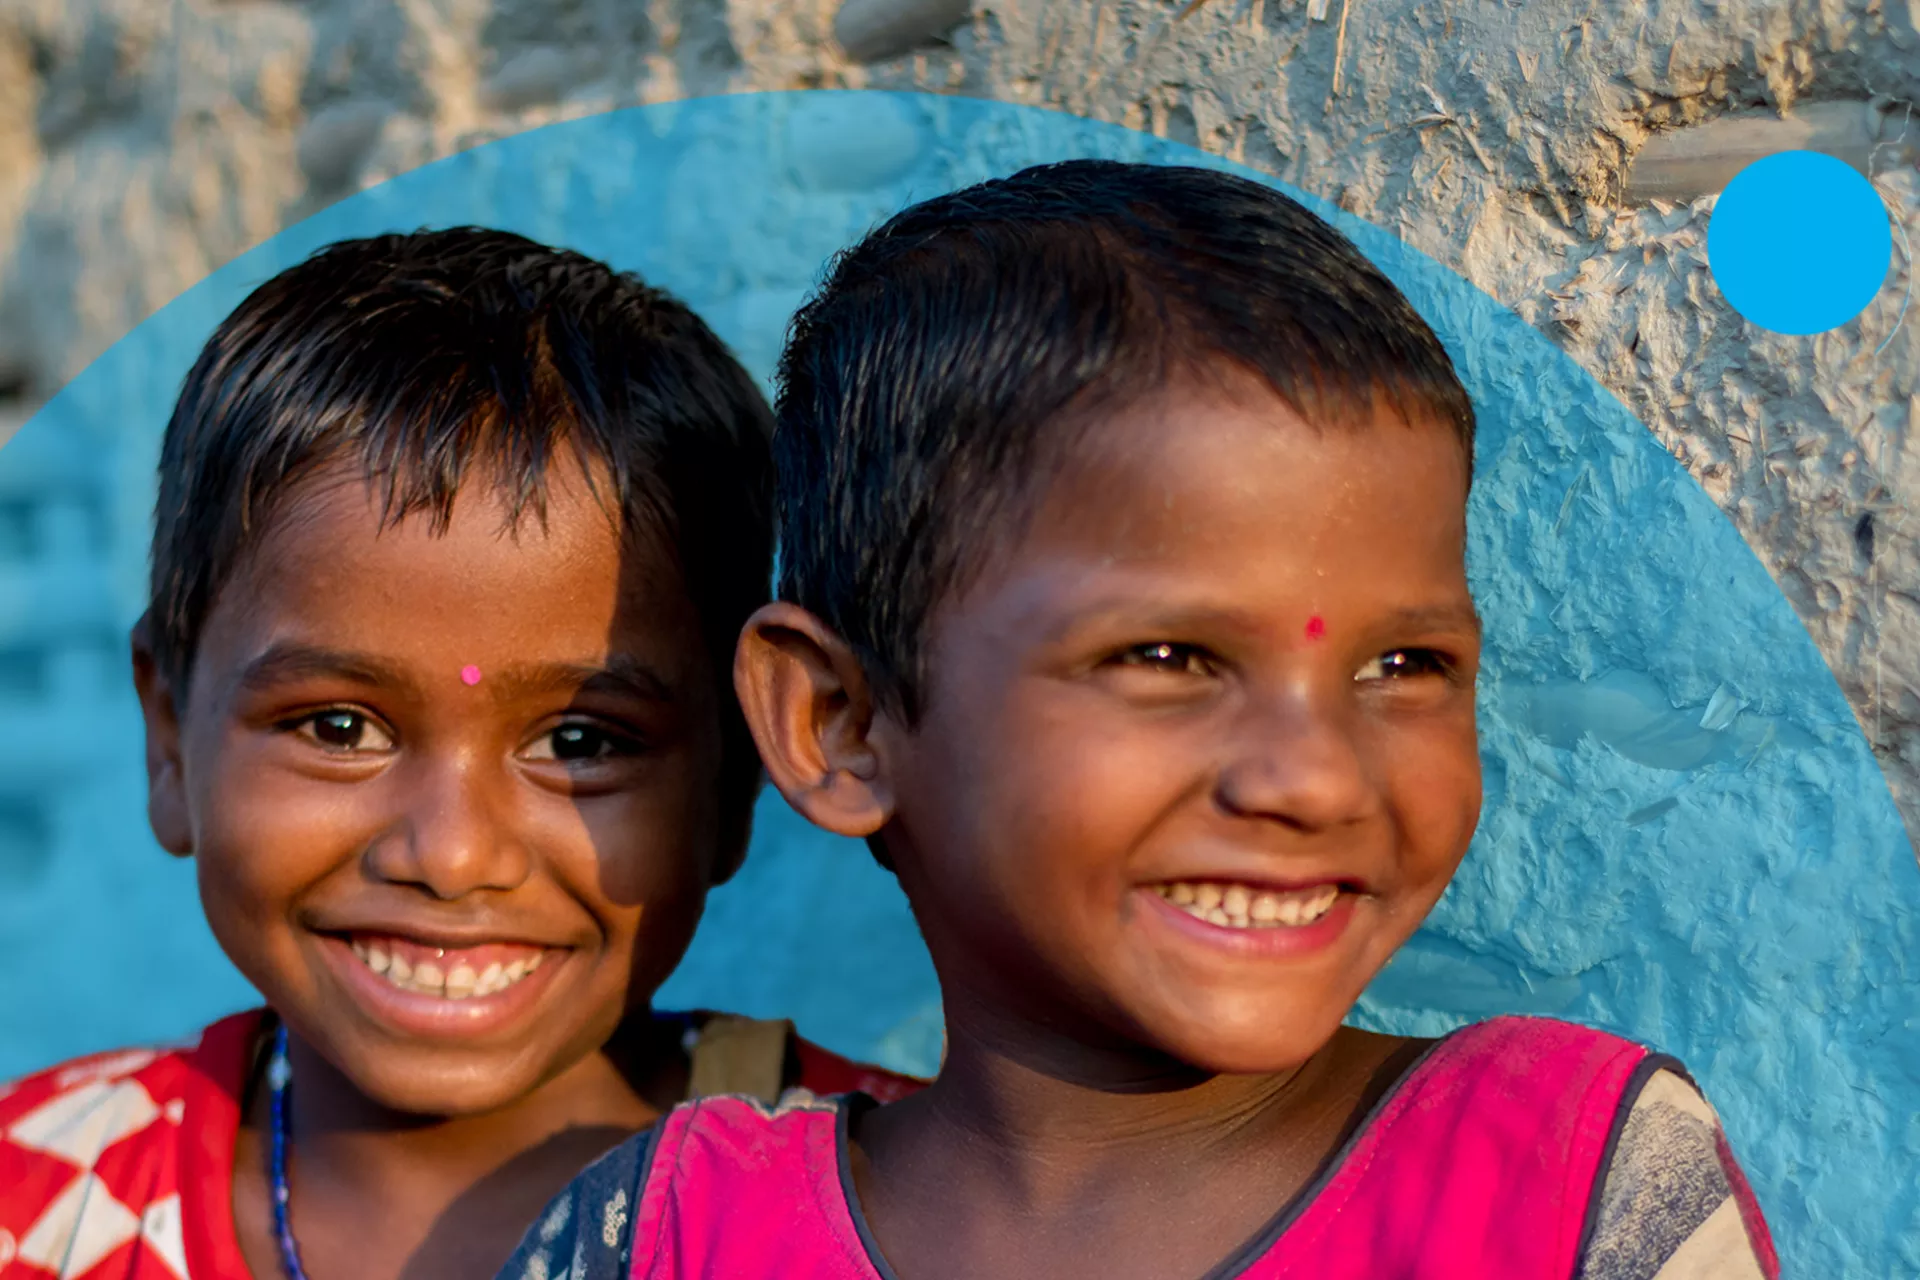 Two young children smile against a plaster wall, with blue polka dots and a 'World Children's Day 2019" logo added to the image.